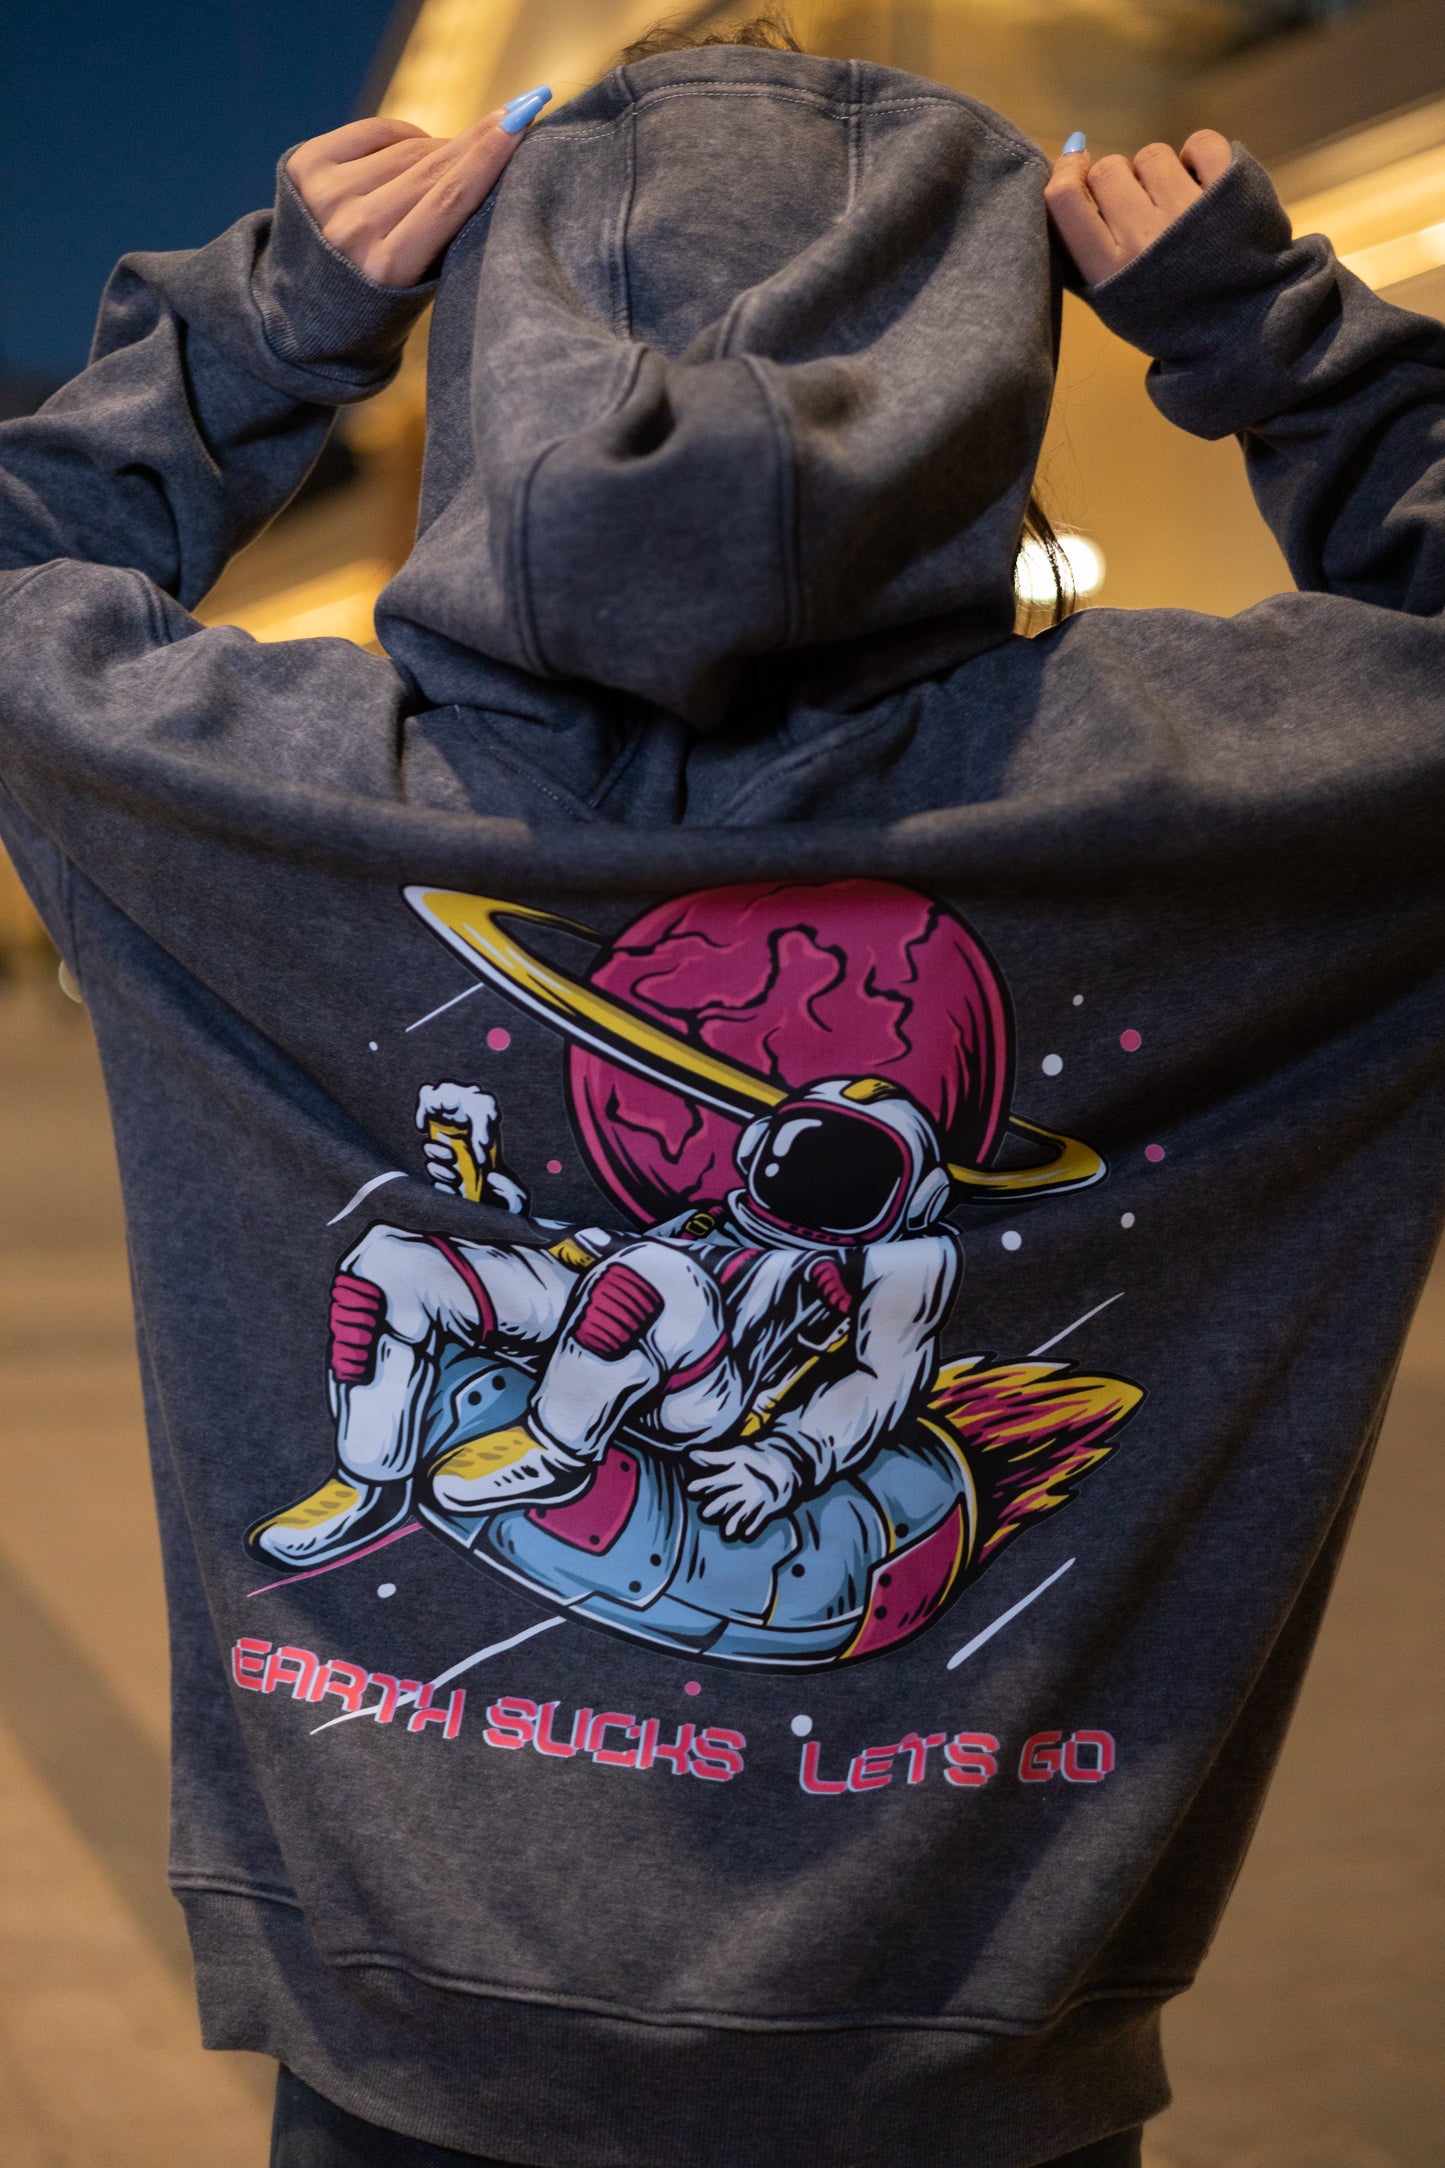 Washed grey oversized hoodie envisioning adventure with vibrant astronaut graphics floating from Earth paired with "HIGH HERE" Mars type for interstellar dreams.